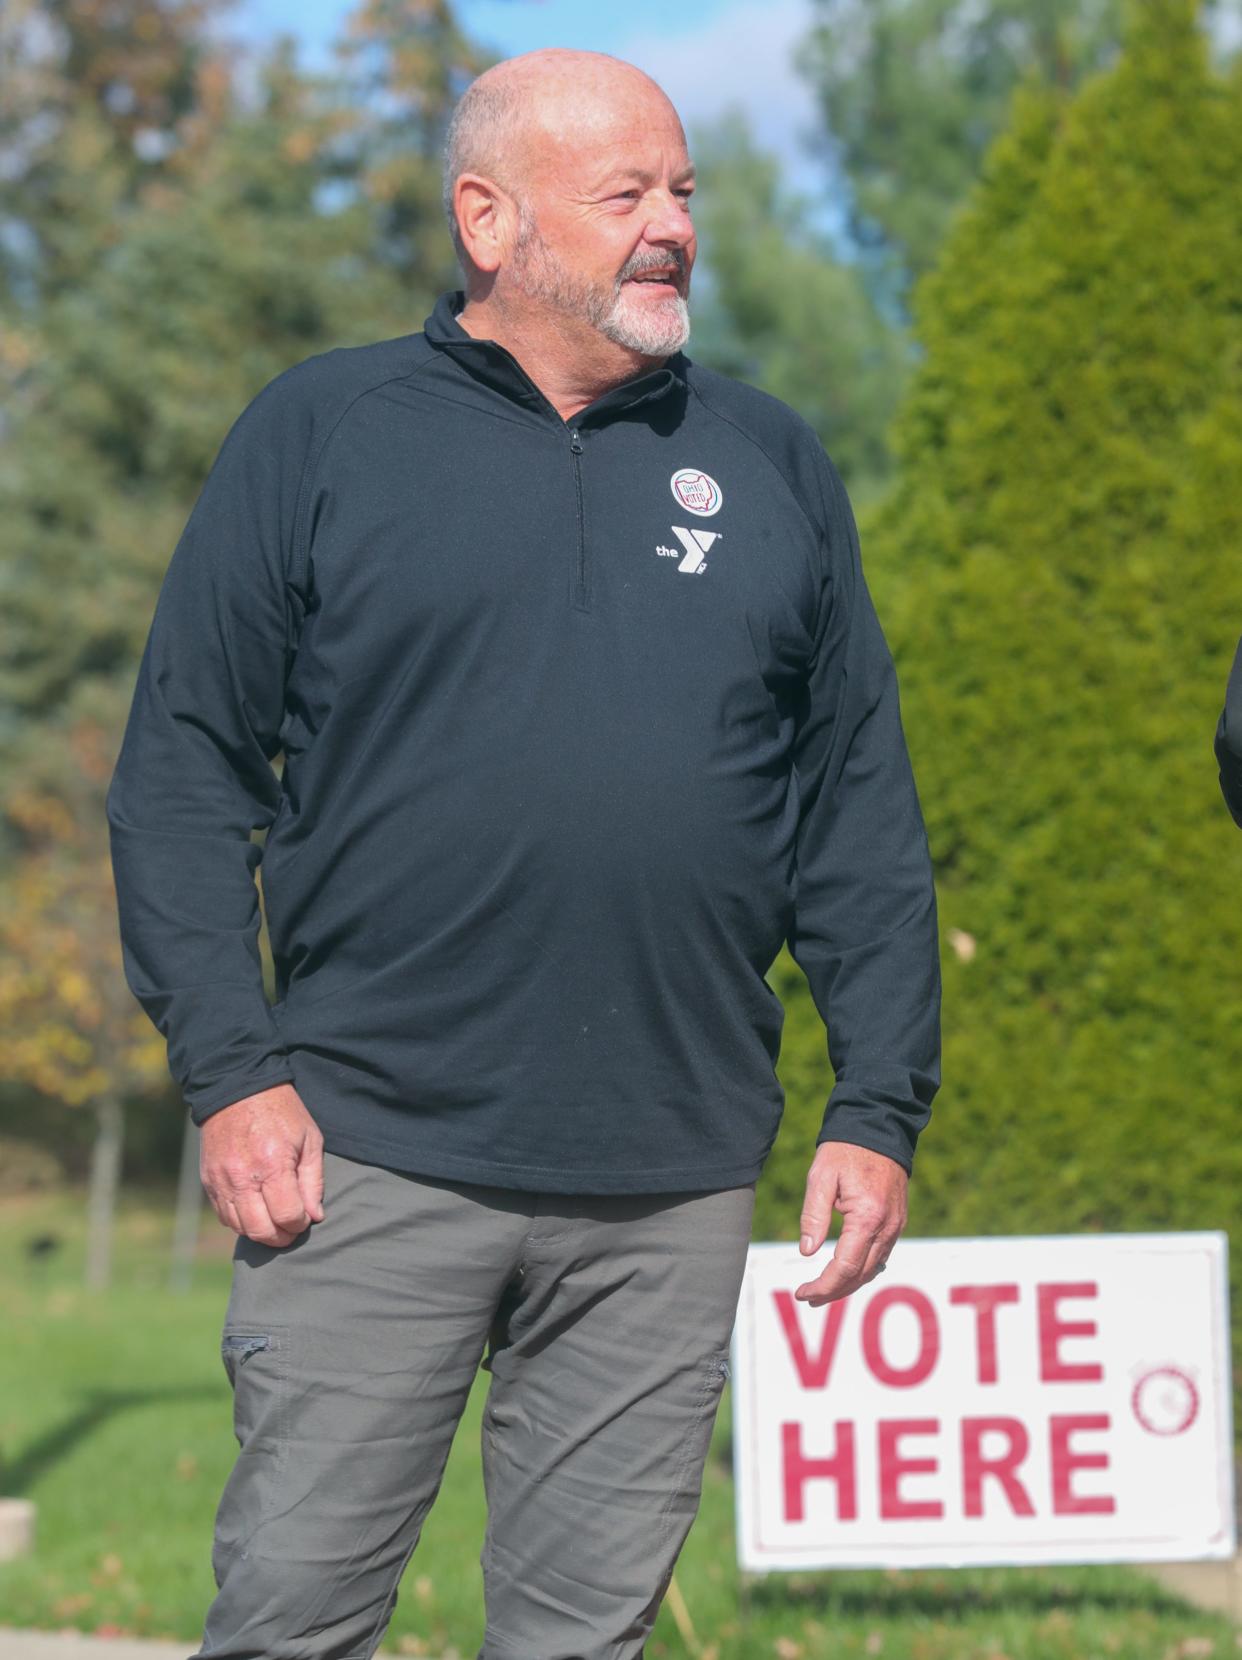 Craig Greenlee talks about how he voted on issues 1 and 2 while standing in front of the polling place at Queen of Heaven Catholic Church in Green.